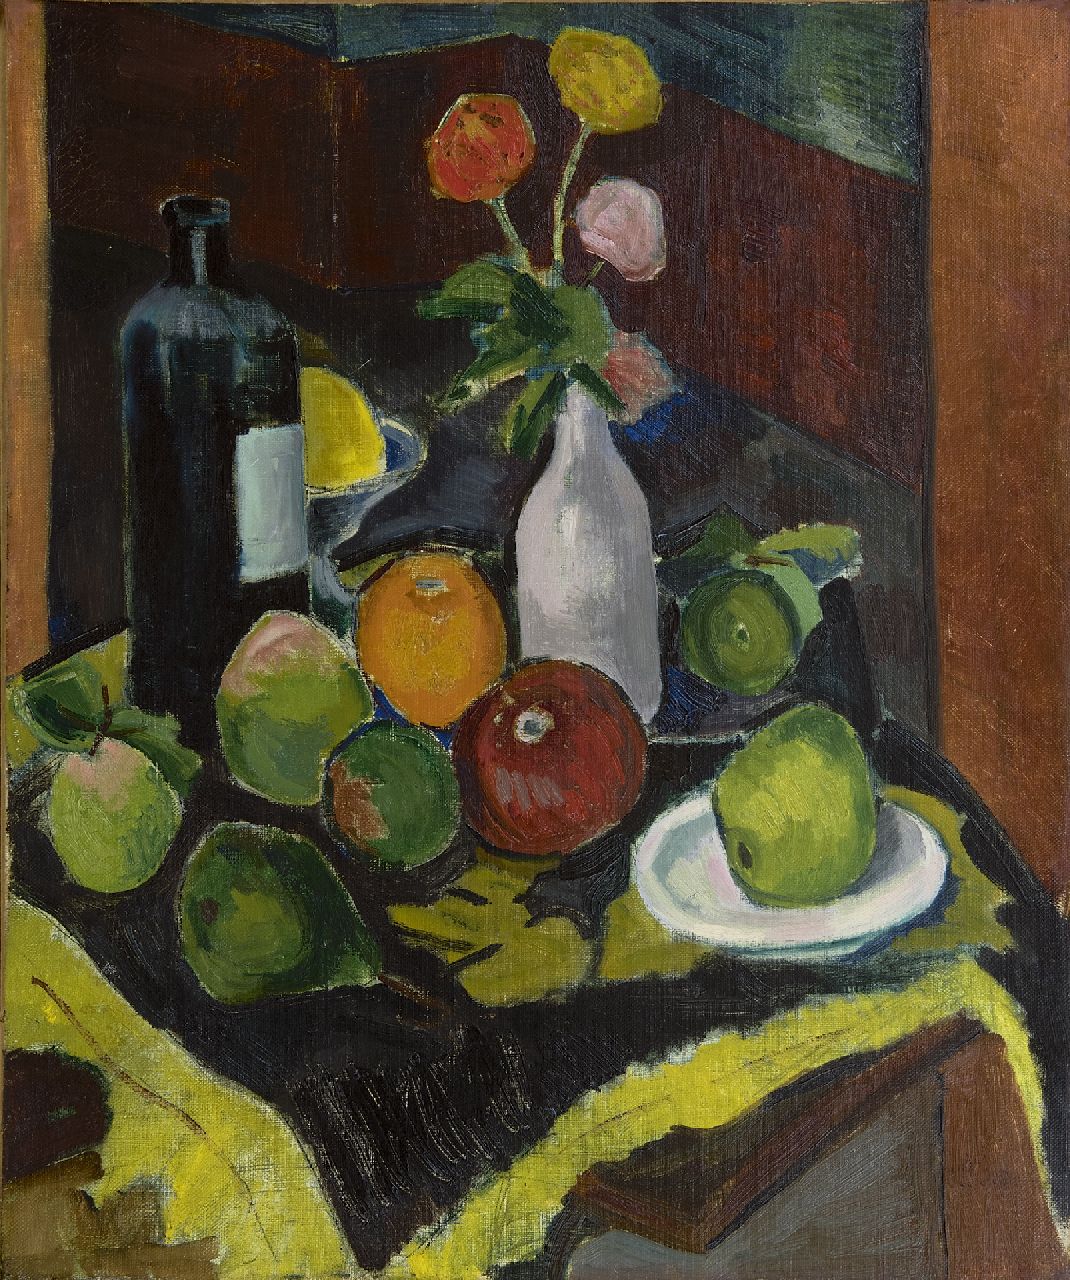 Schelfhout L.  | Lodewijk Schelfhout, A still life with fruit, flowers and a bottle, oil on canvas 55.5 x 46.0 cm, signed l.r. and dated 1908